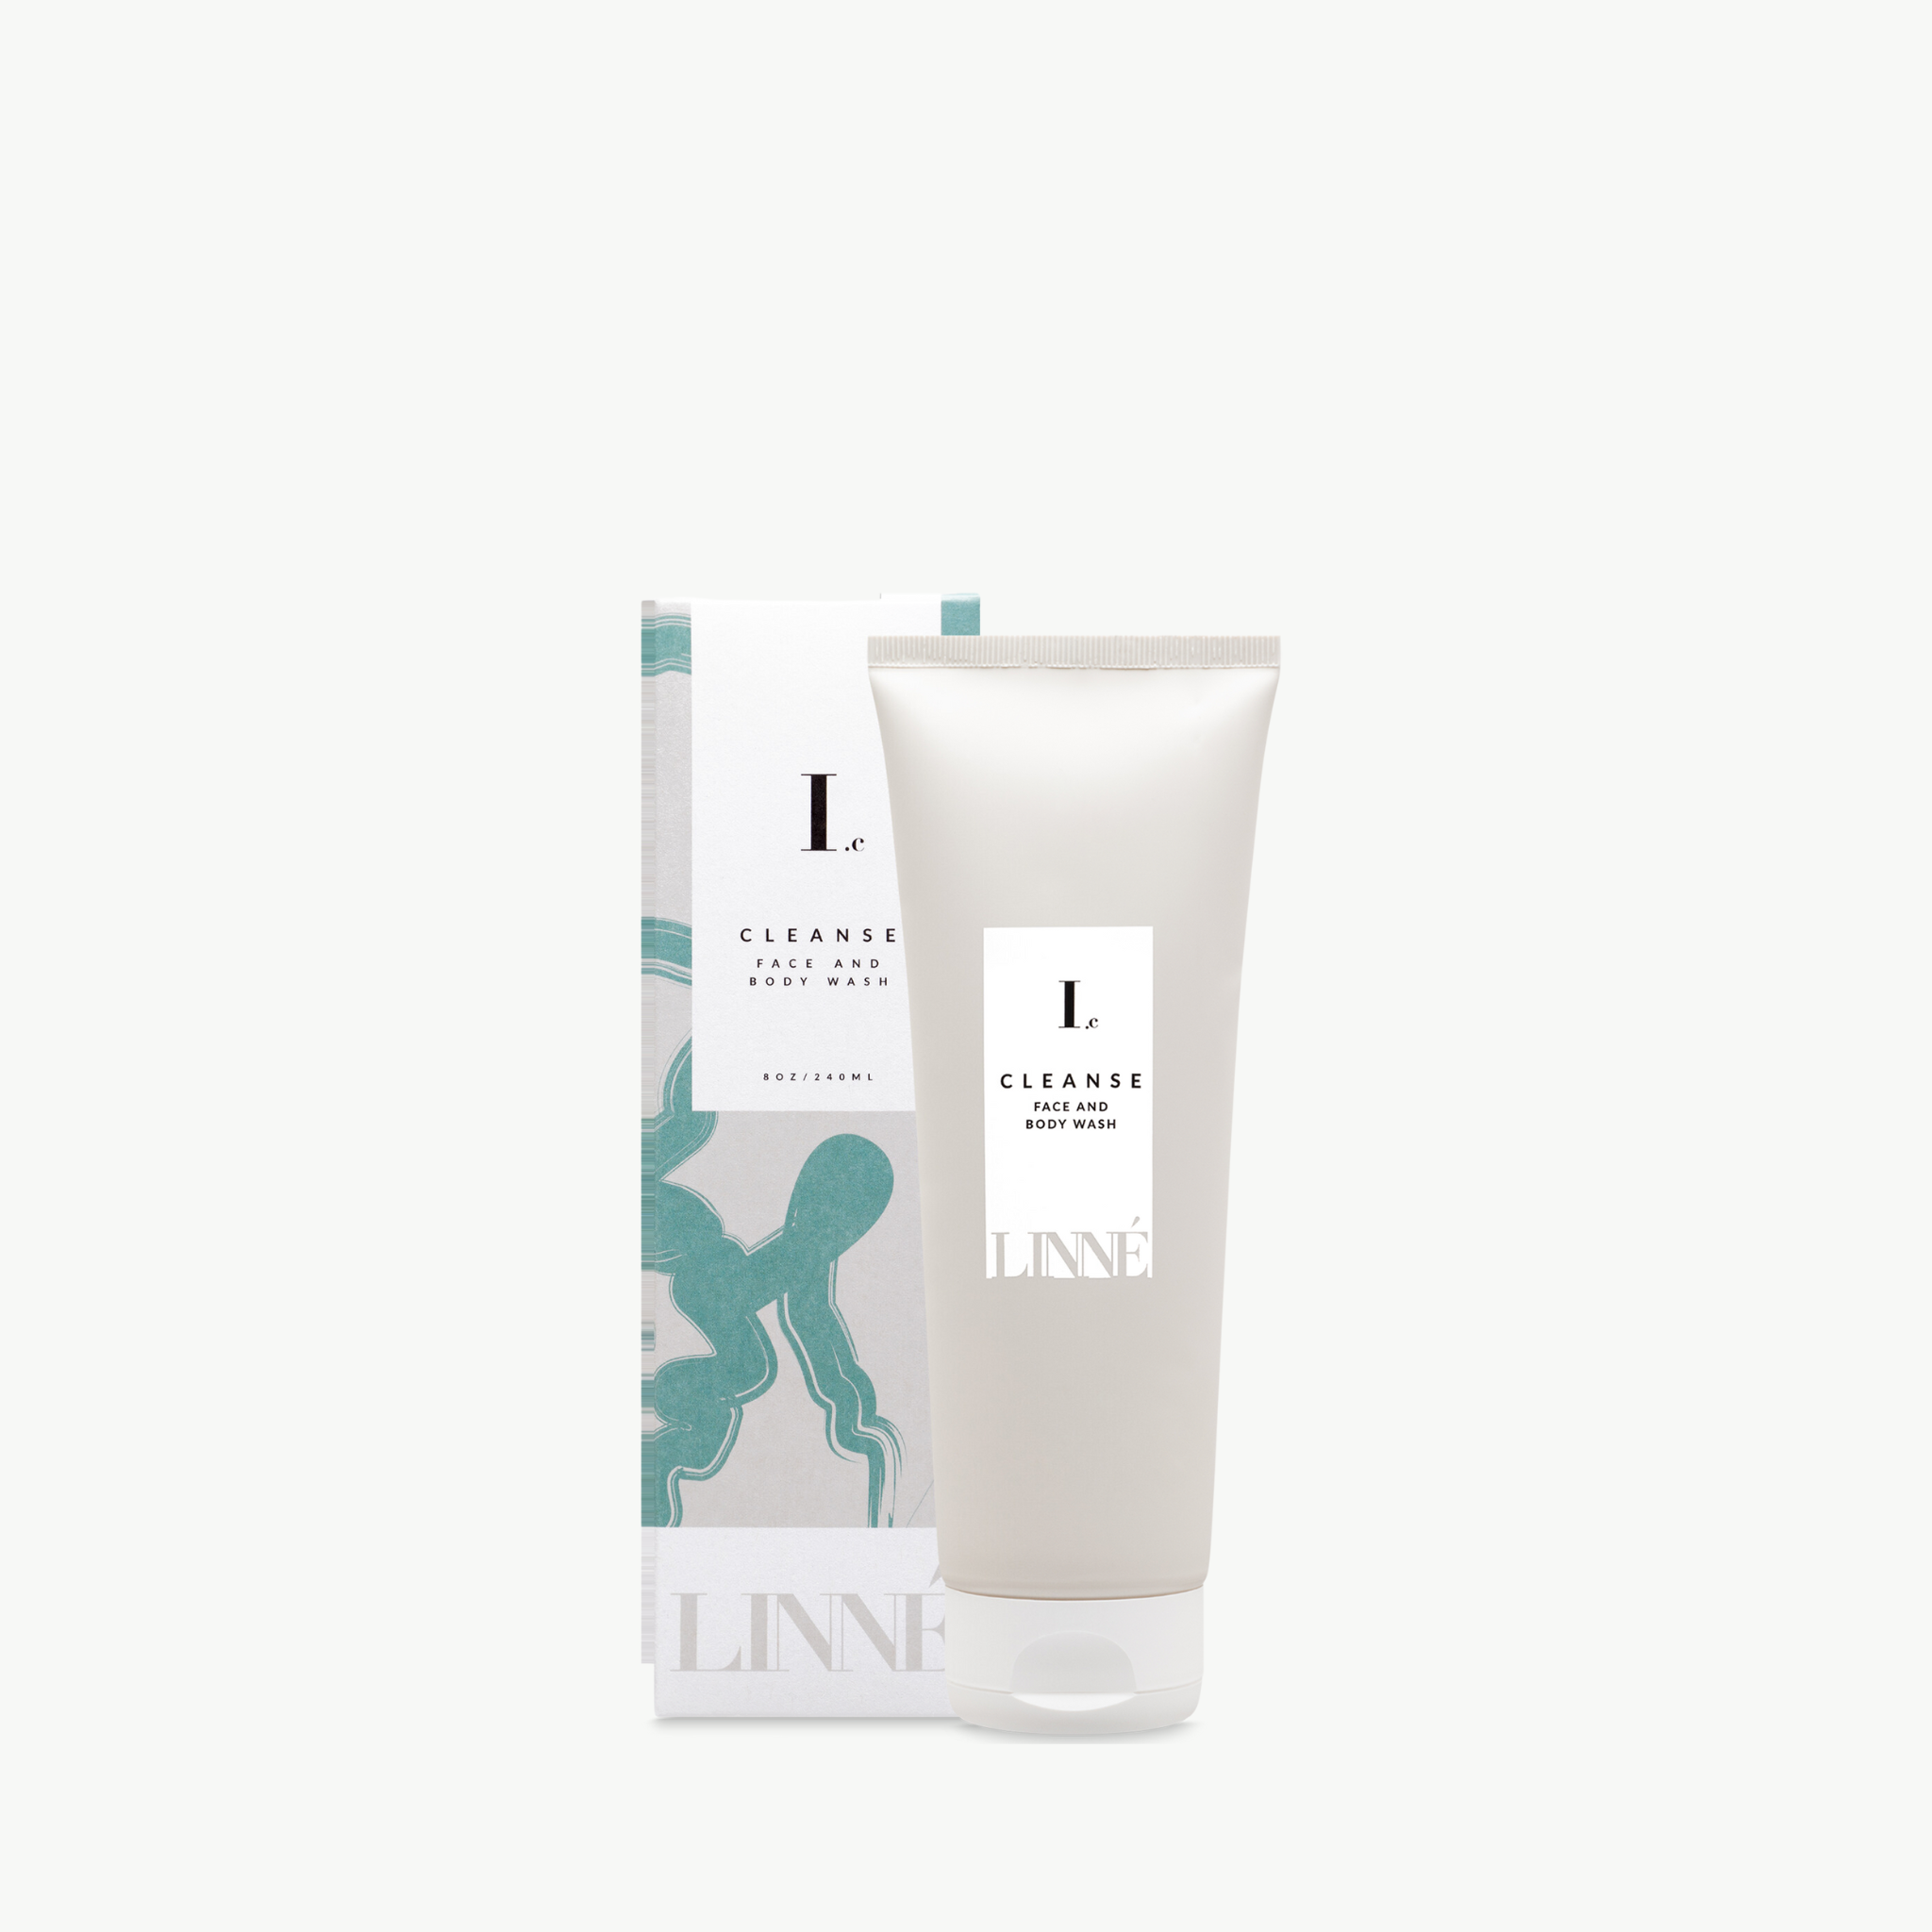 CLEANSE face and body wash